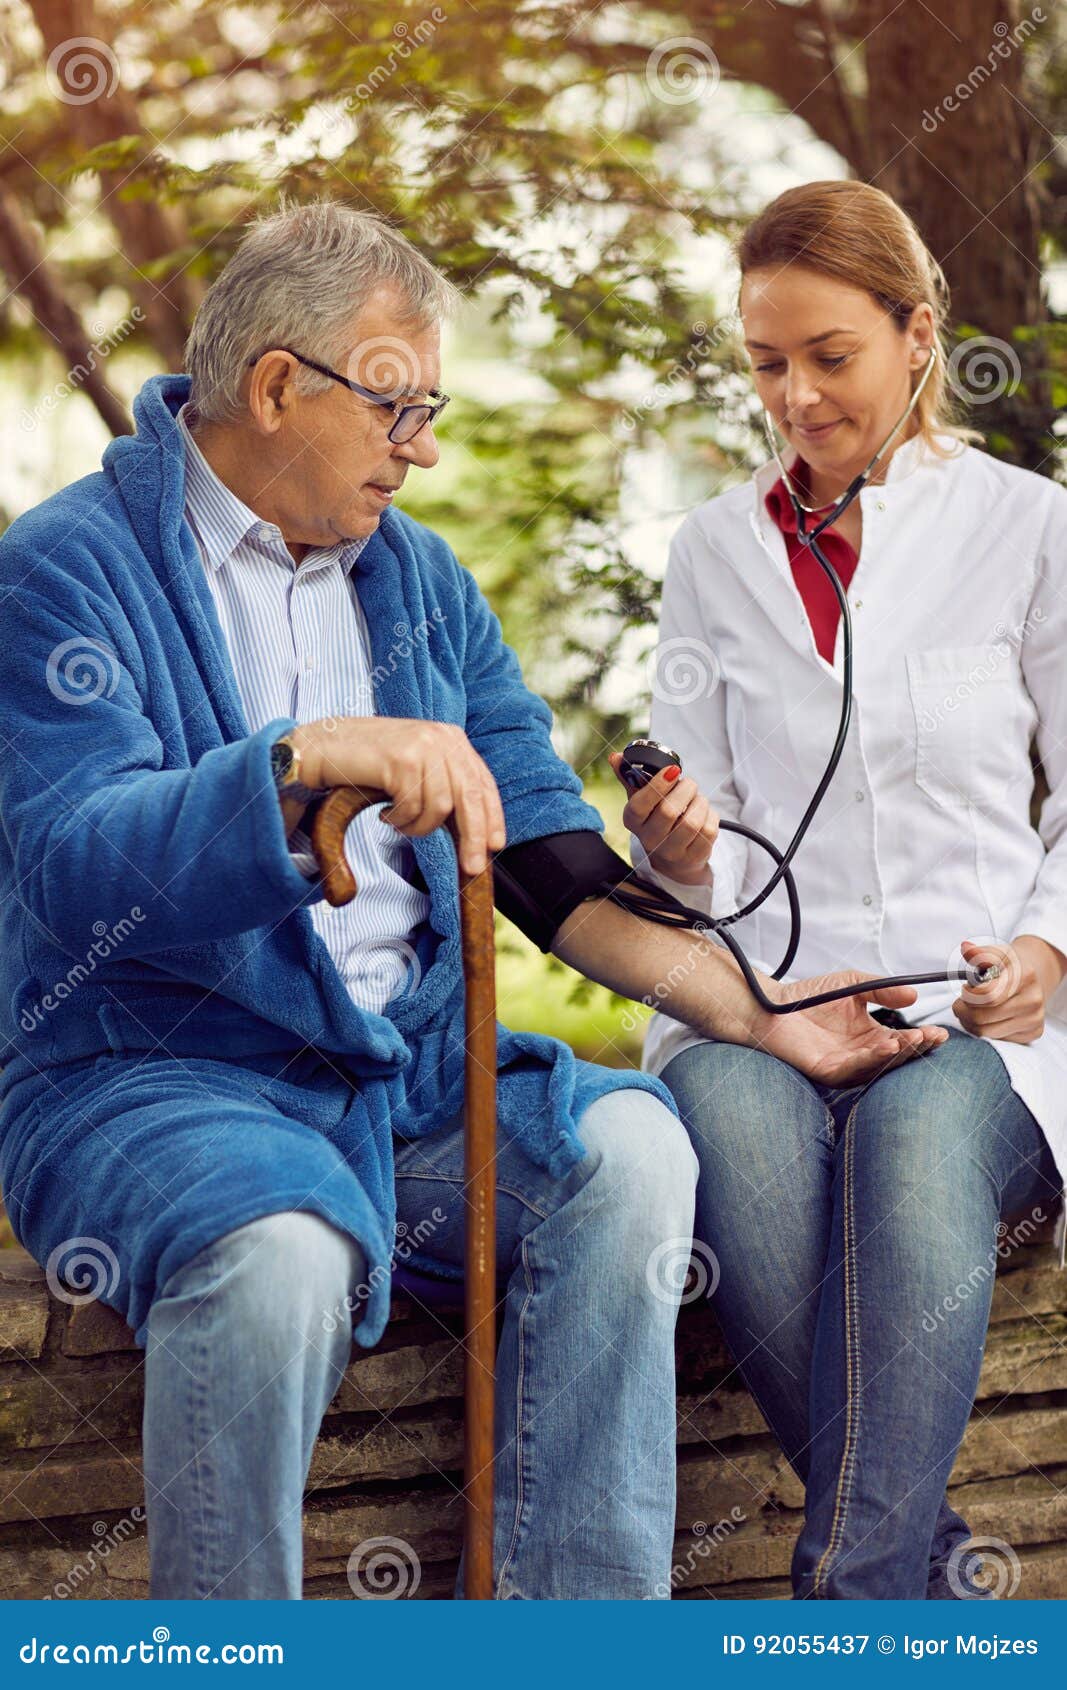 hospitals, labs and clinics- assessment of blood pressure elderly man.